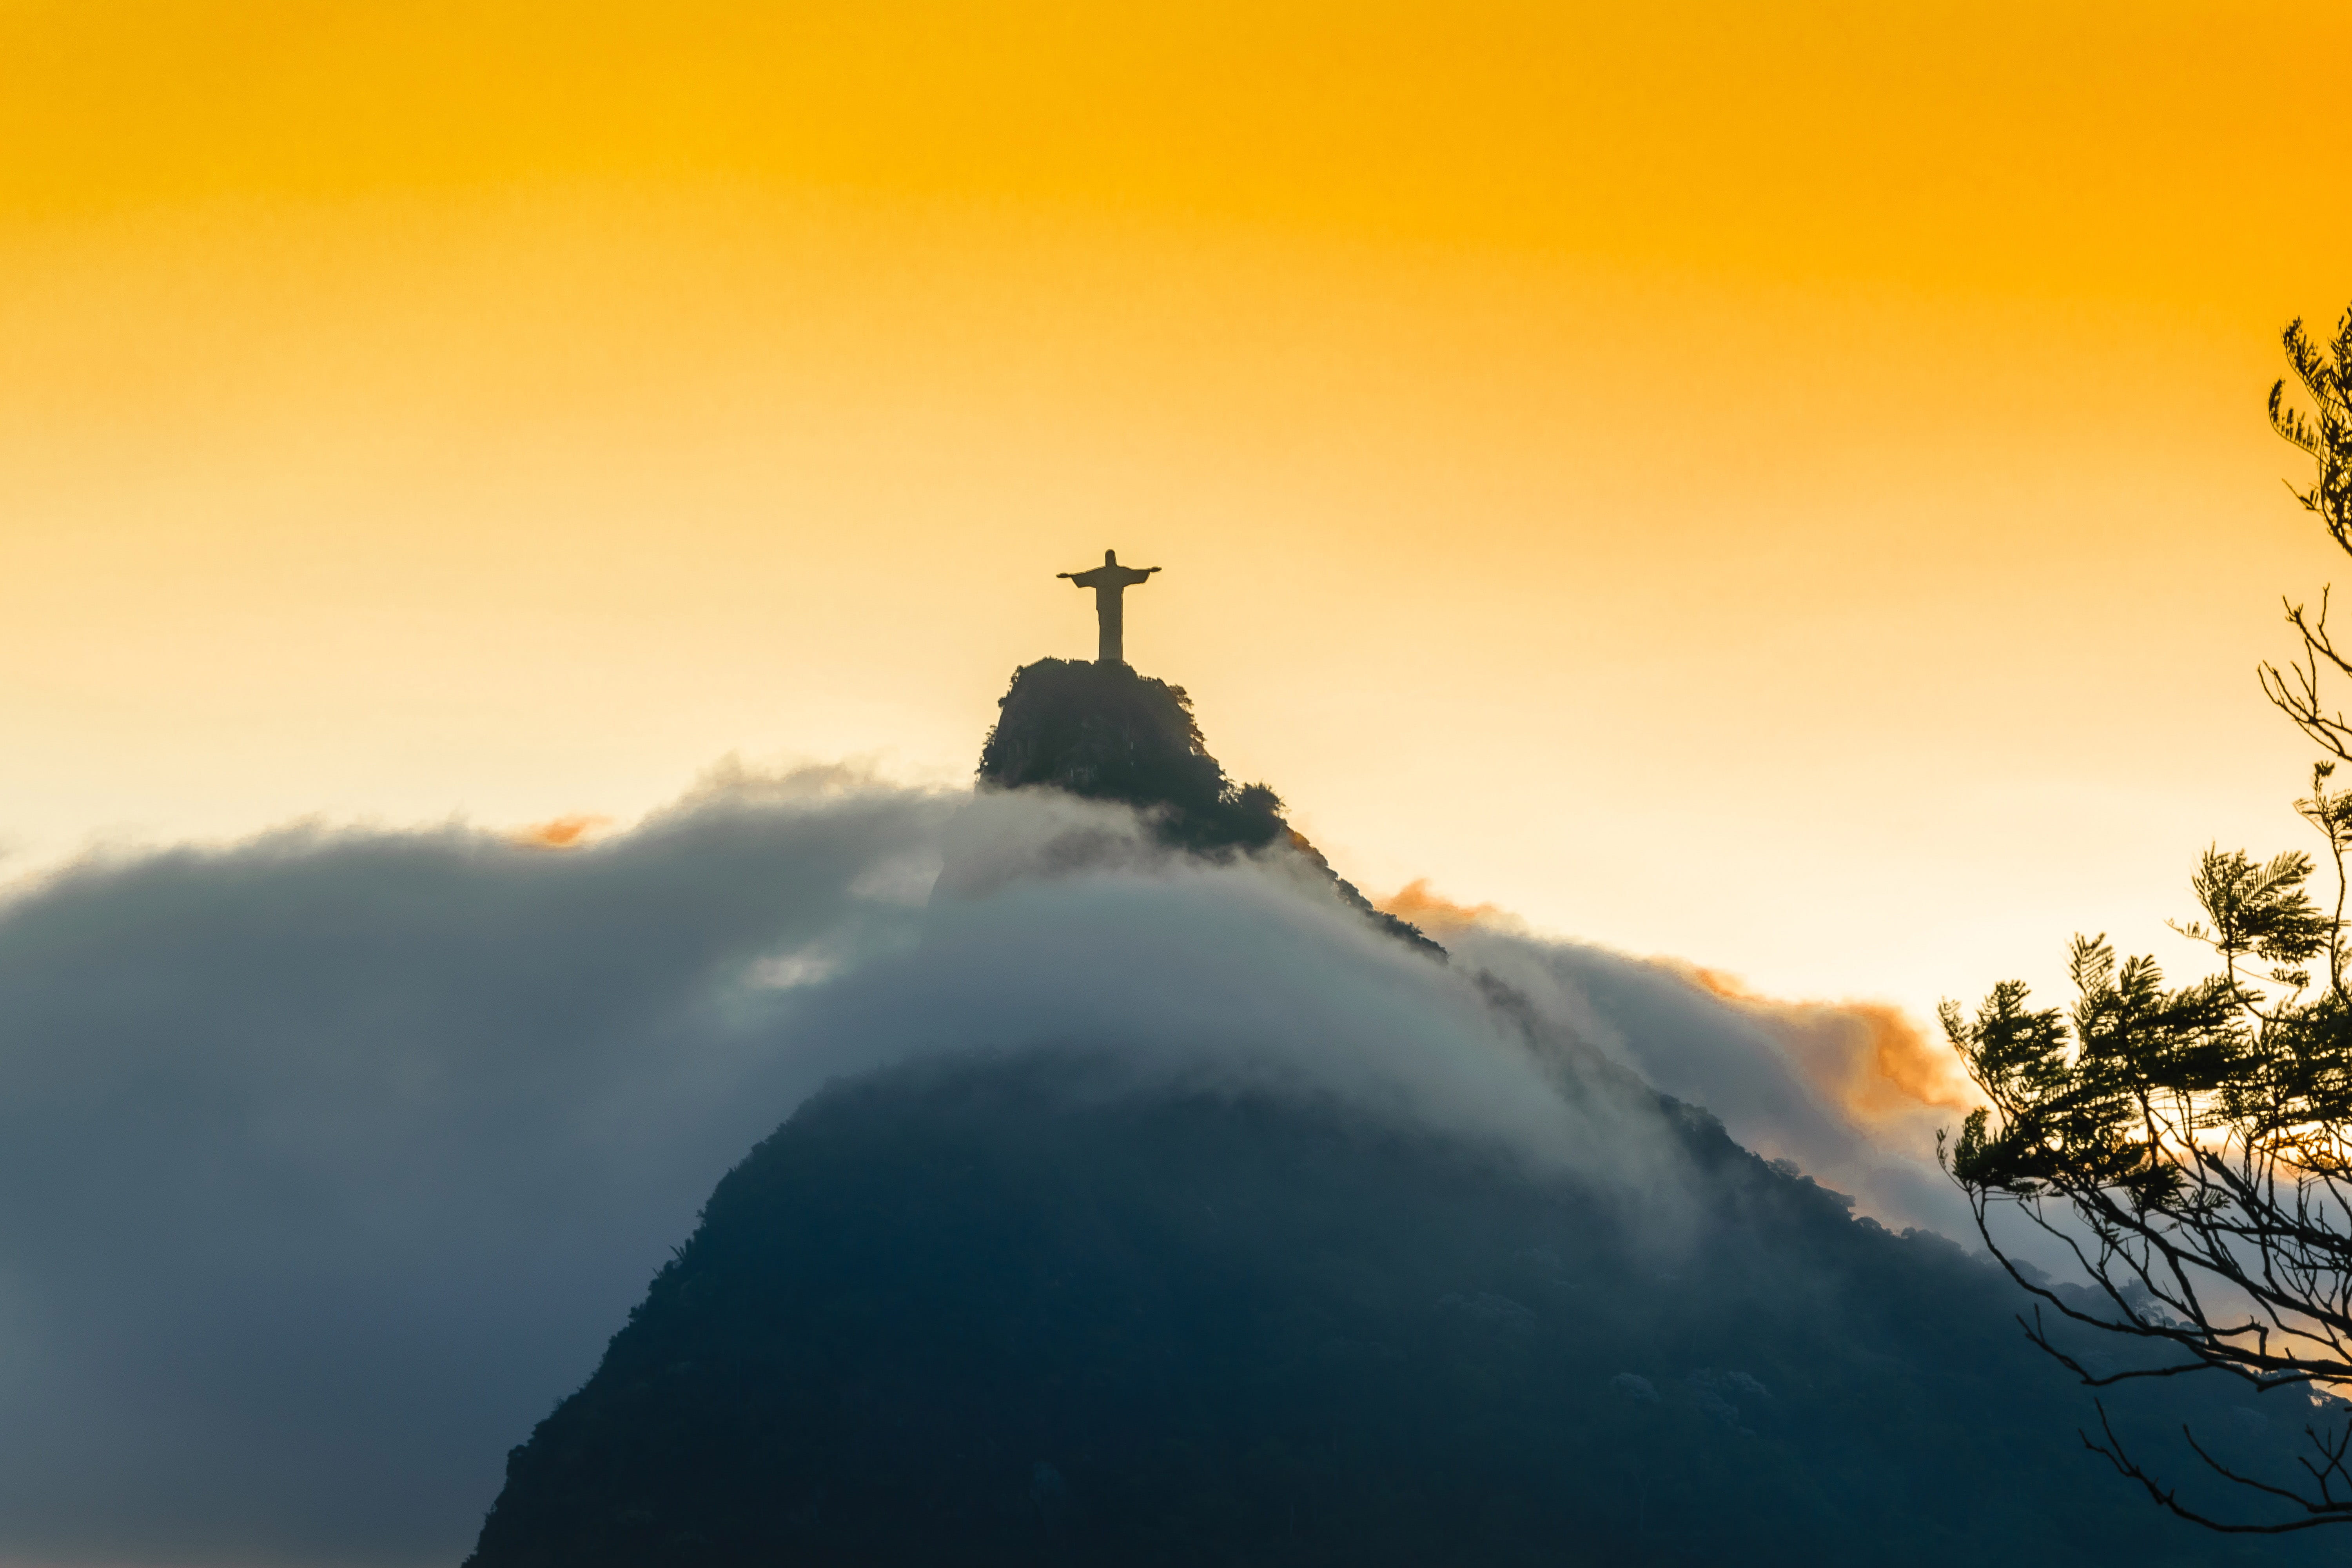 Sunset and dusk over the Christ Statue in Rio De Janeiro, Brazil